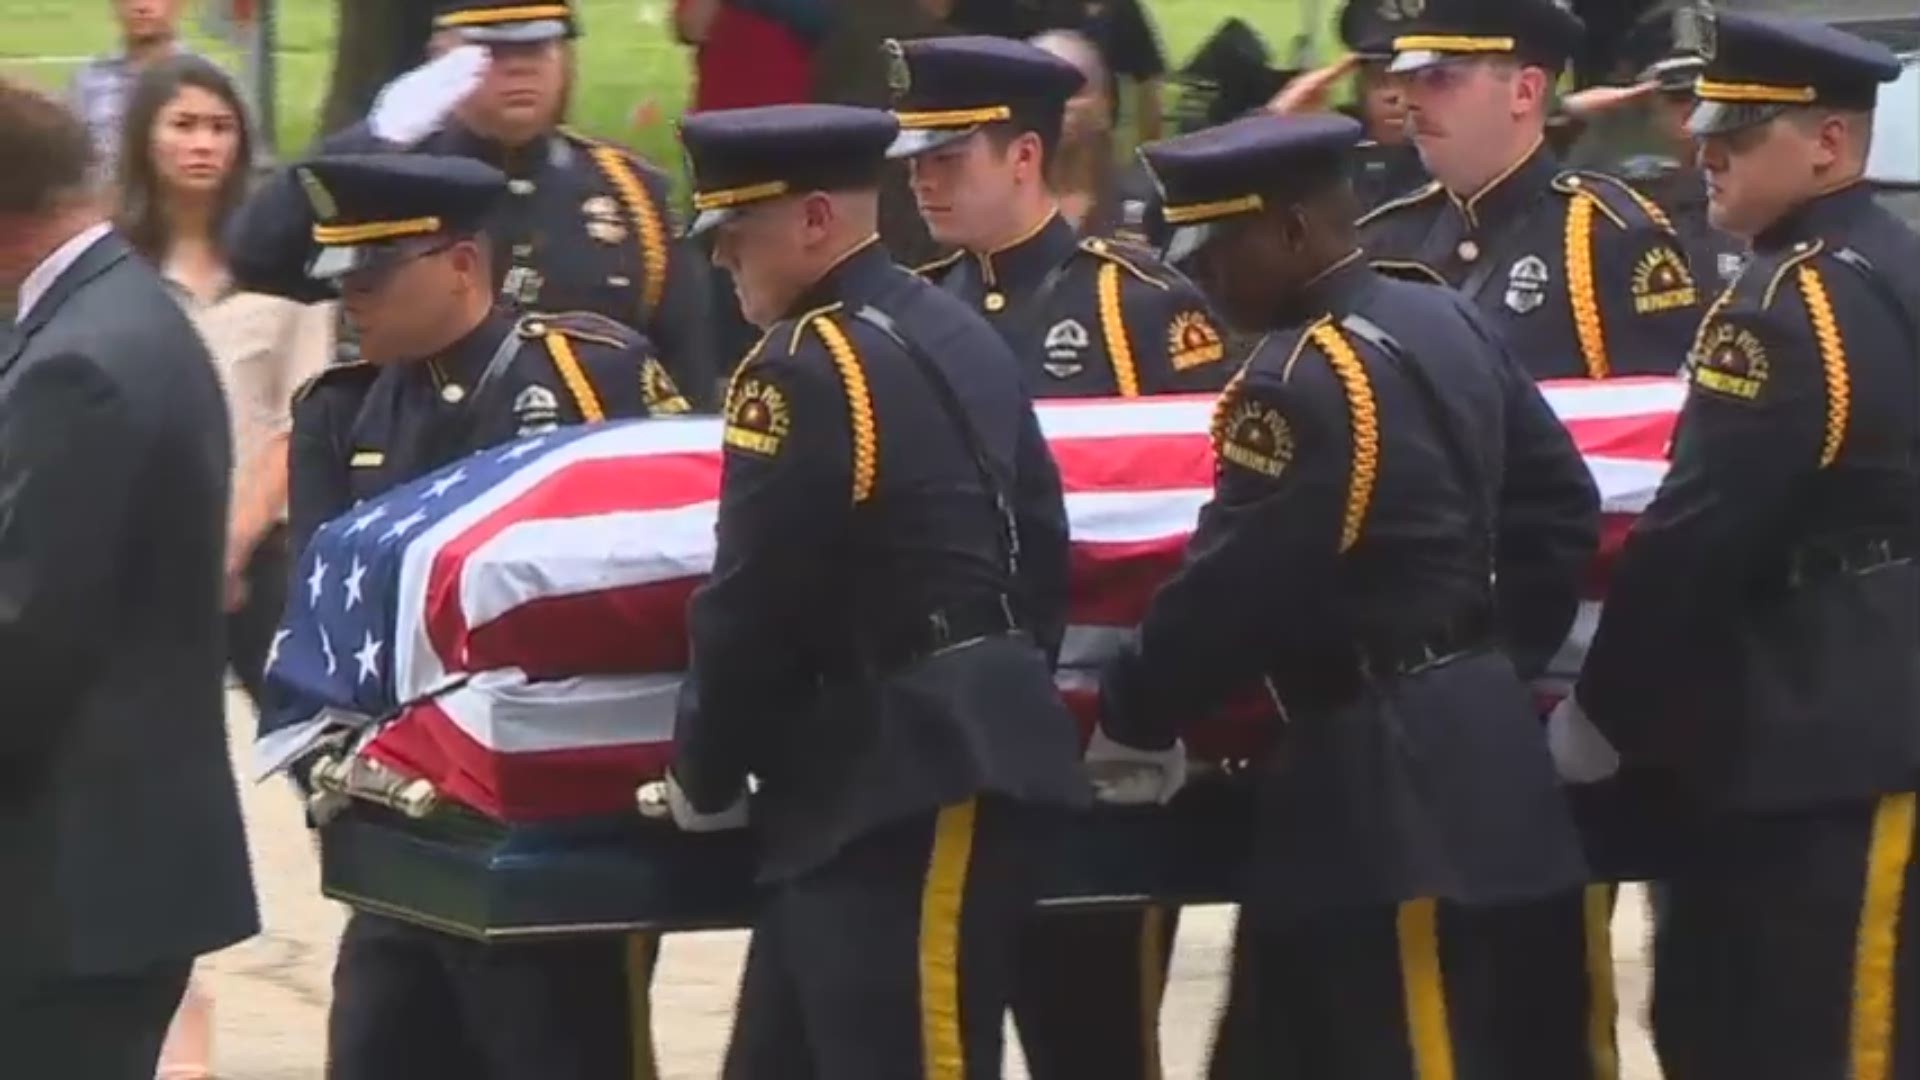 Santander, who was killed in the line of duty last week, was laid to rest Tuesday.